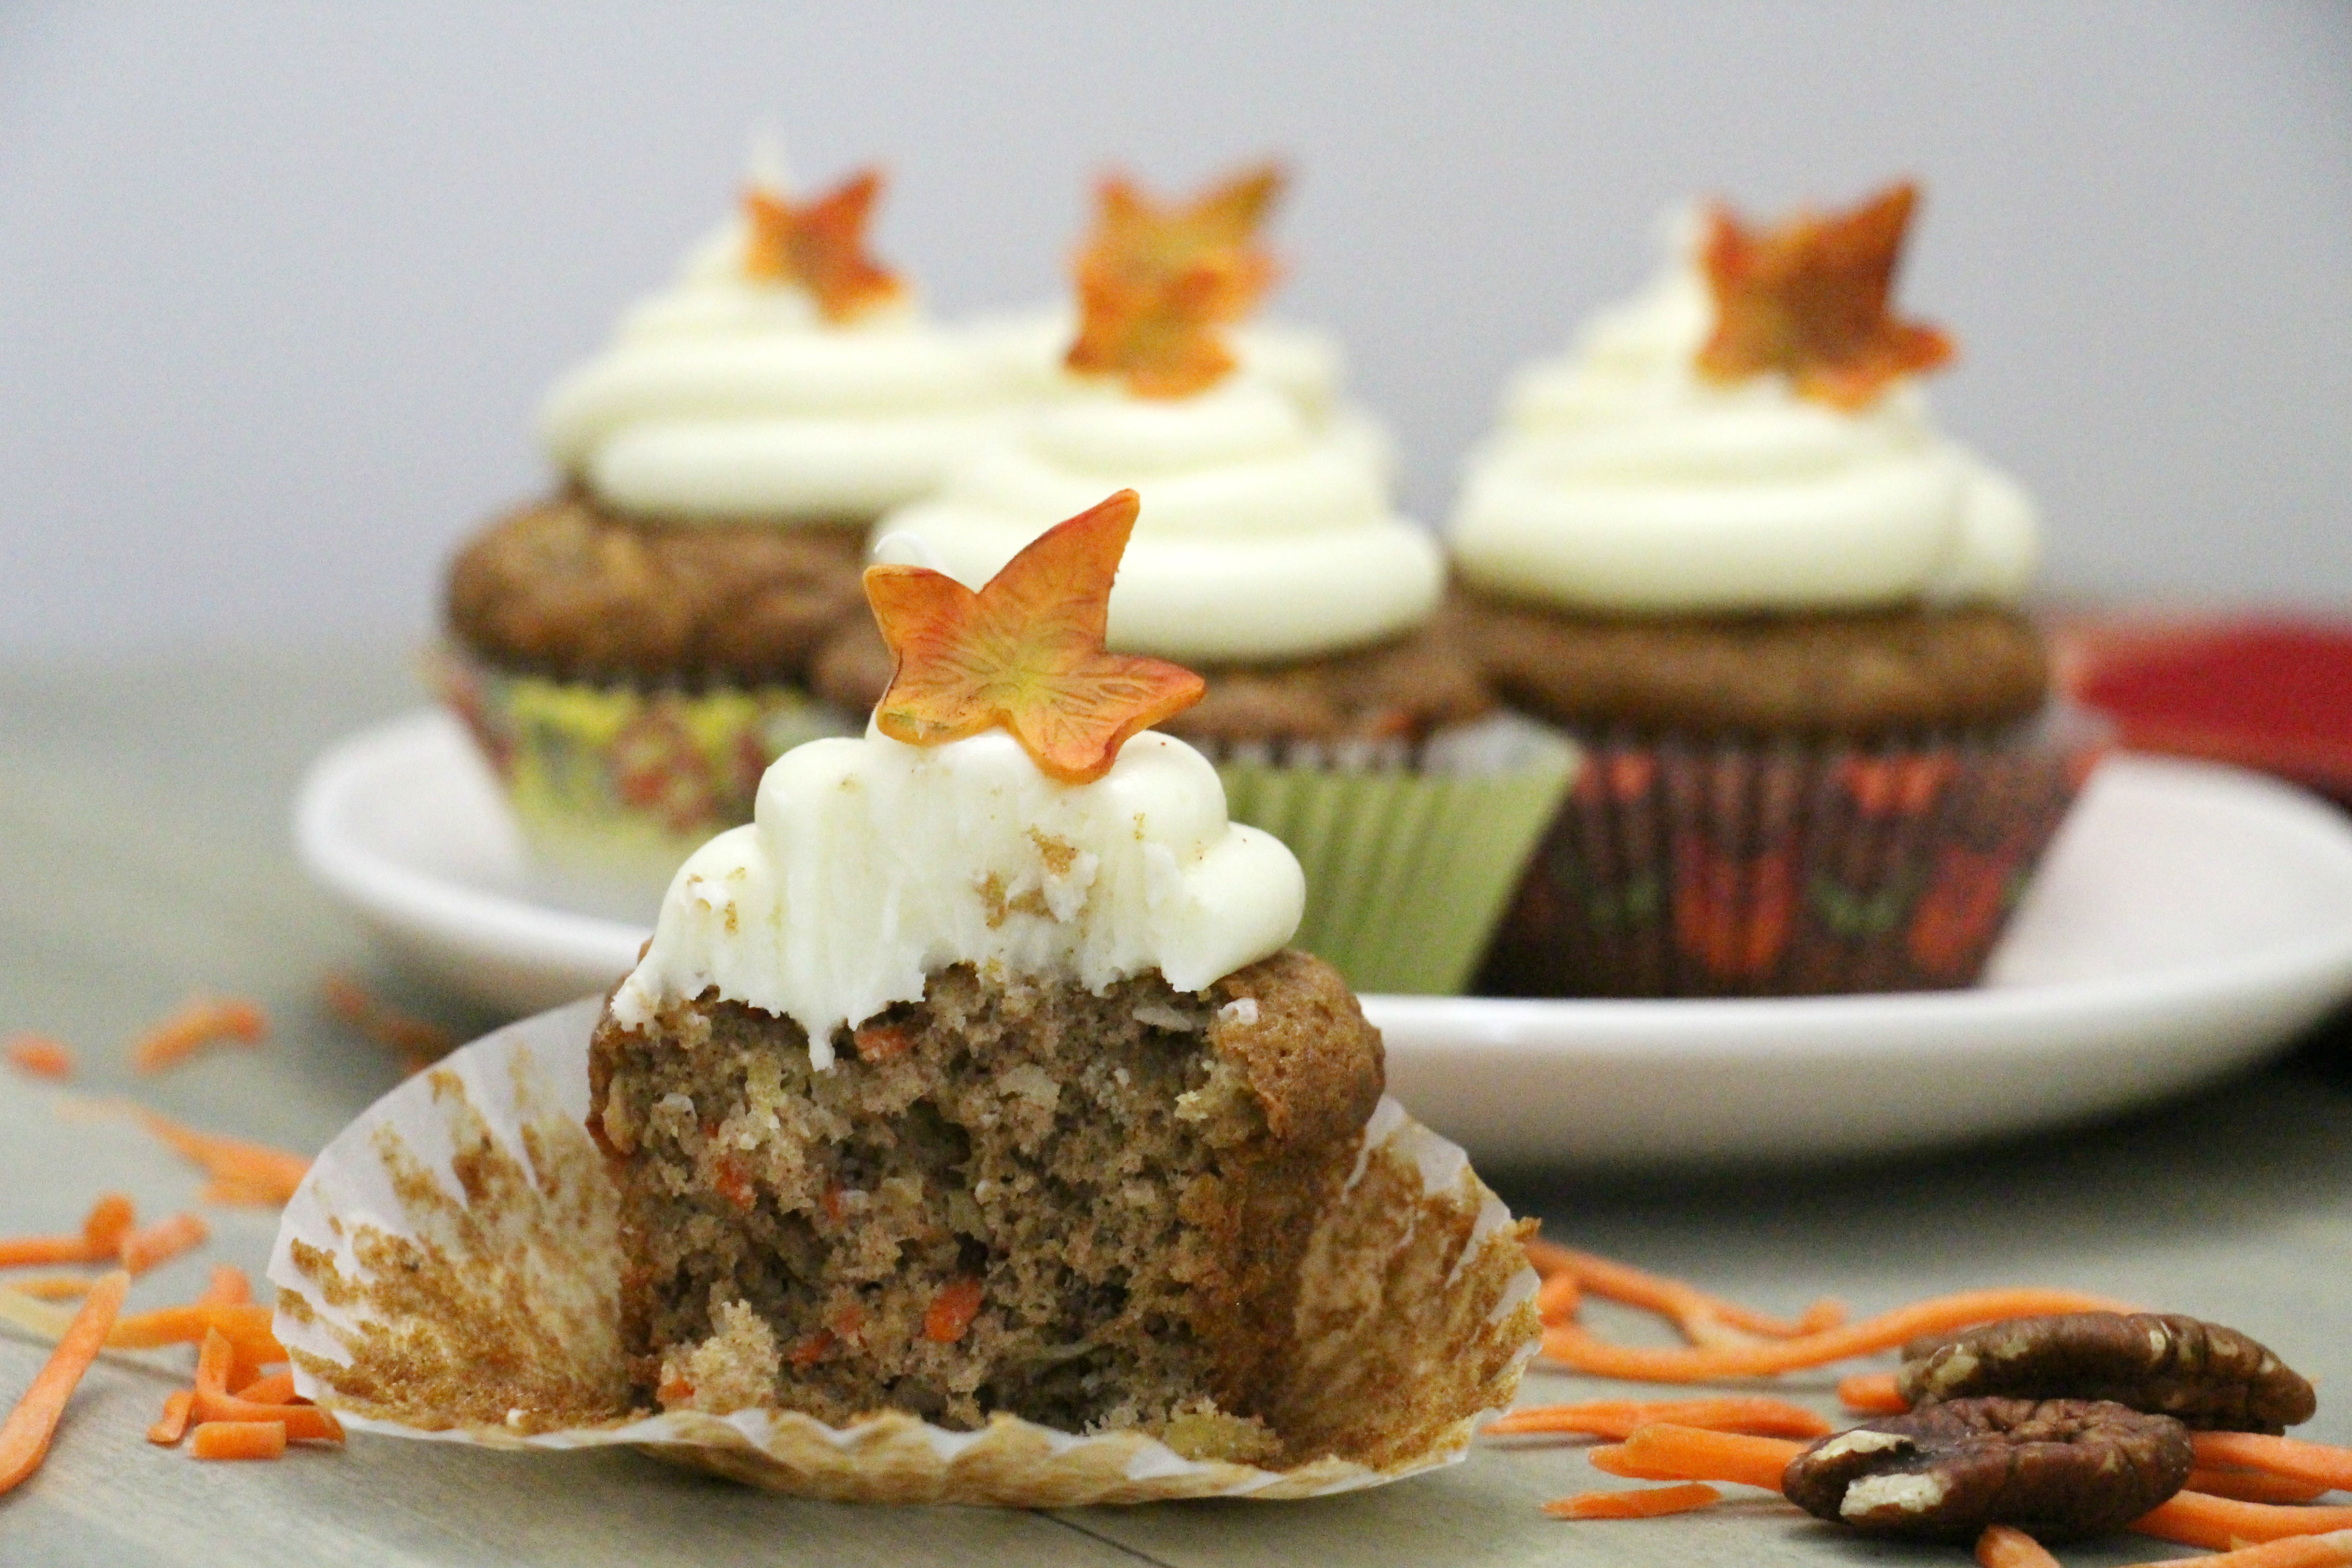 Behind the cake - Carrot cake cupcakes frosted with cream cheese and decorated with a fondant fall leaf